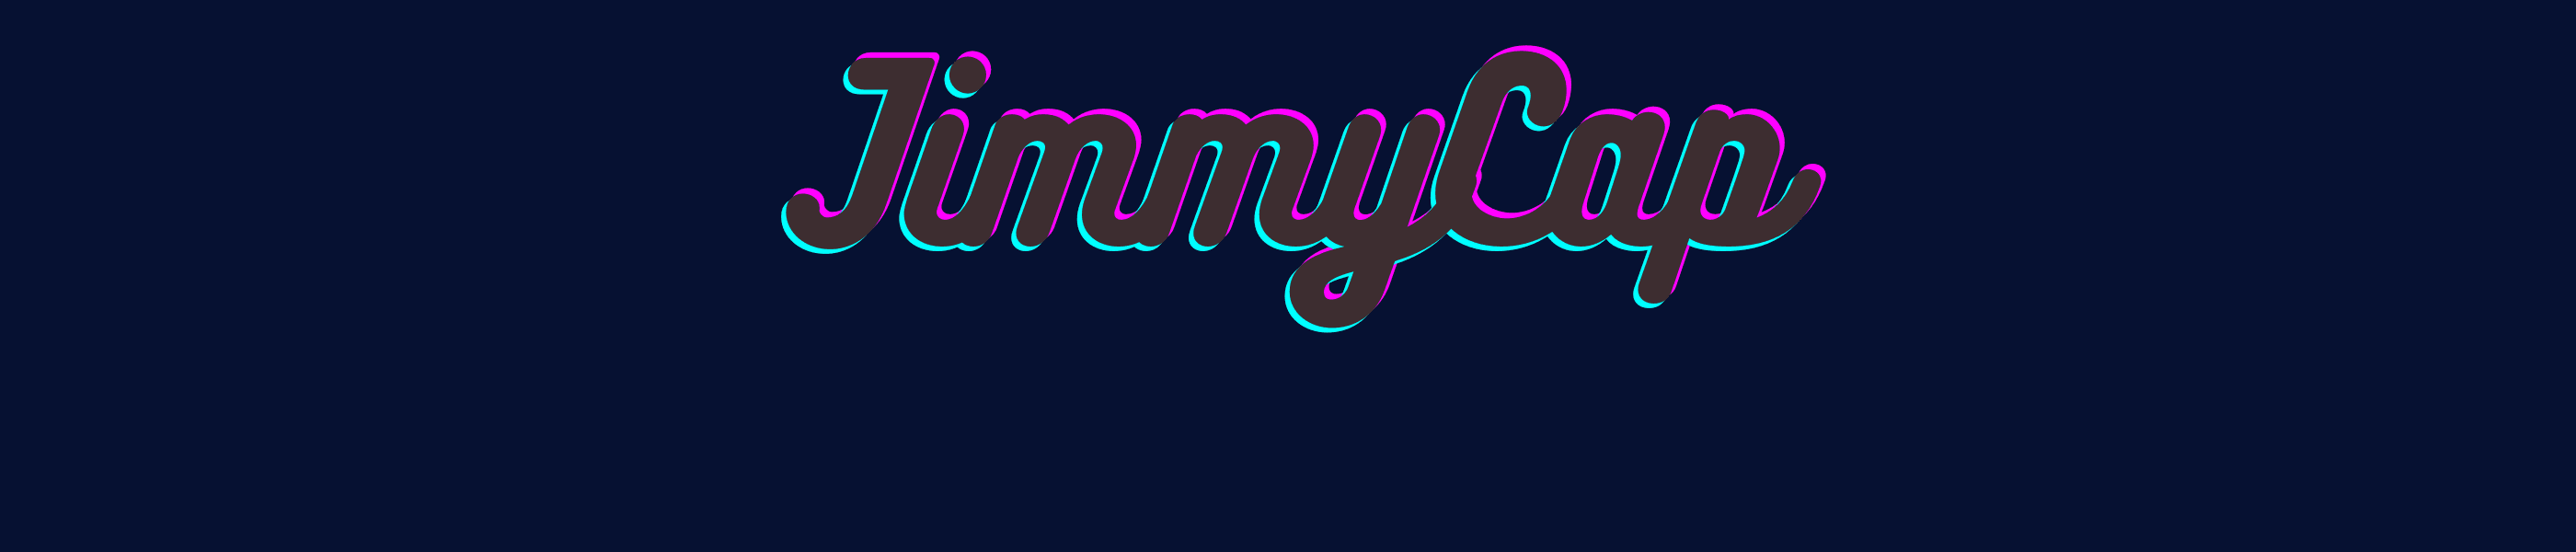 JimmyCaps banner